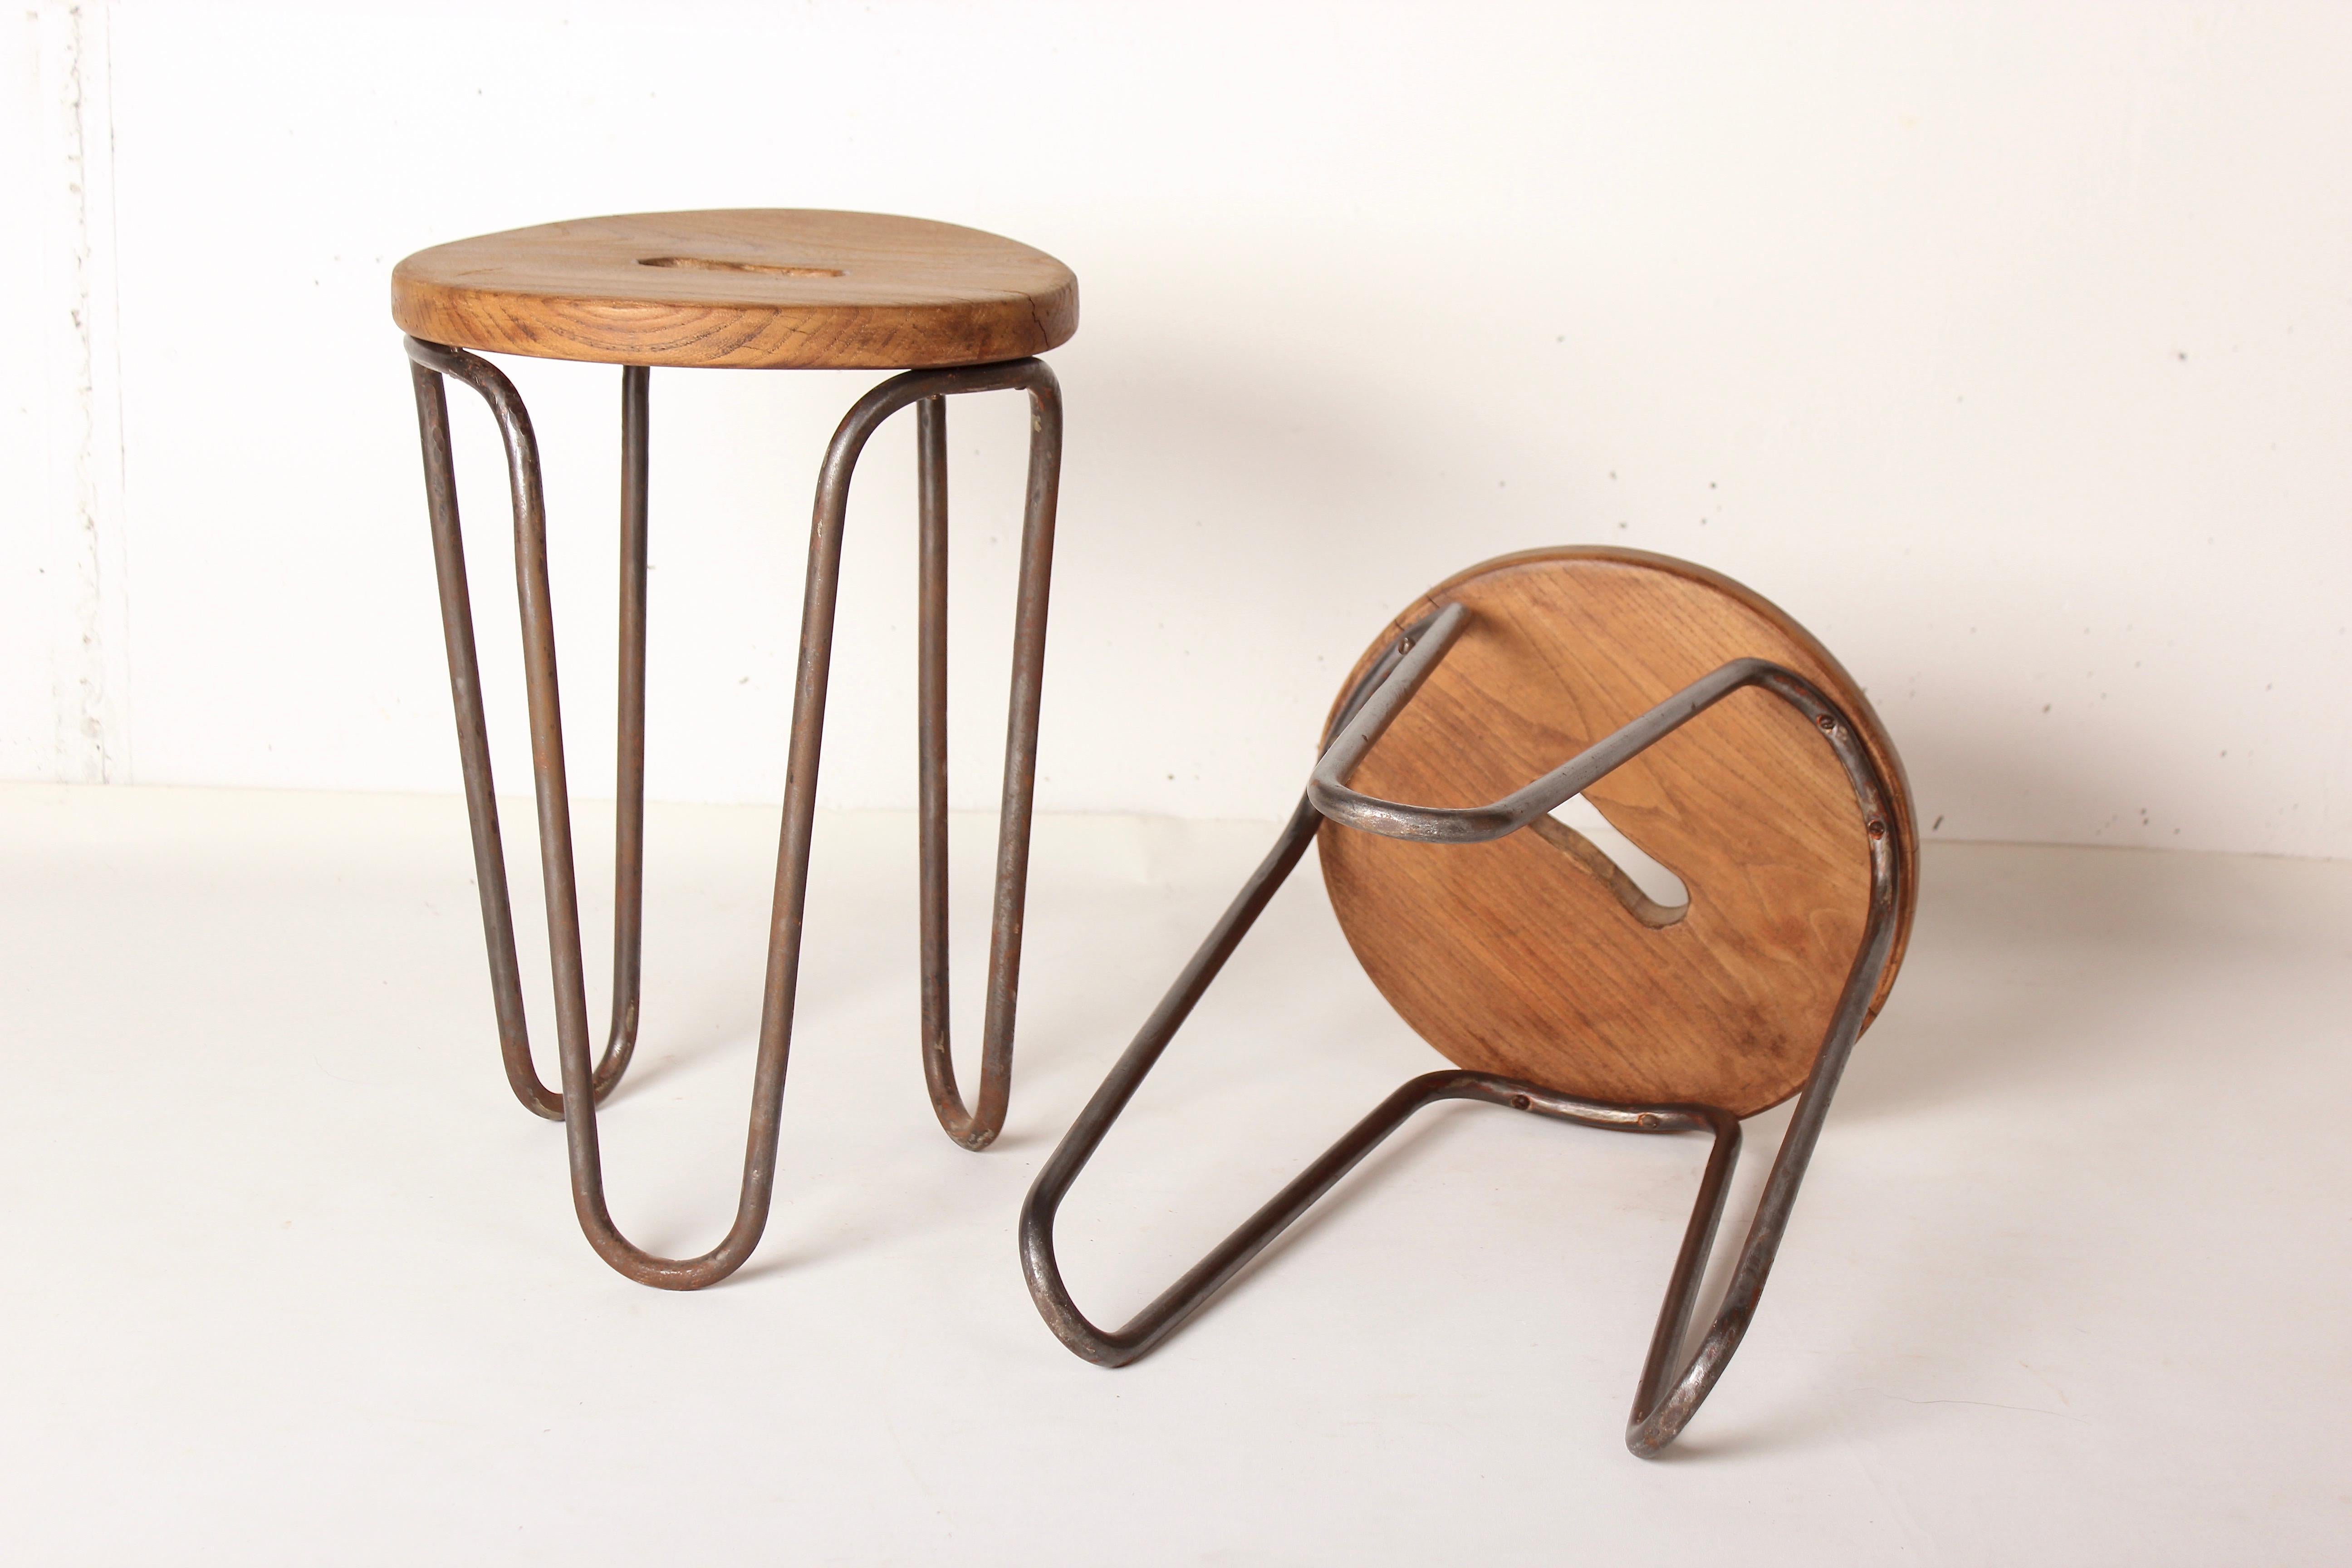 Steel Stool by Cesar Janello for Raoul Guys Aa Éditions, 1947